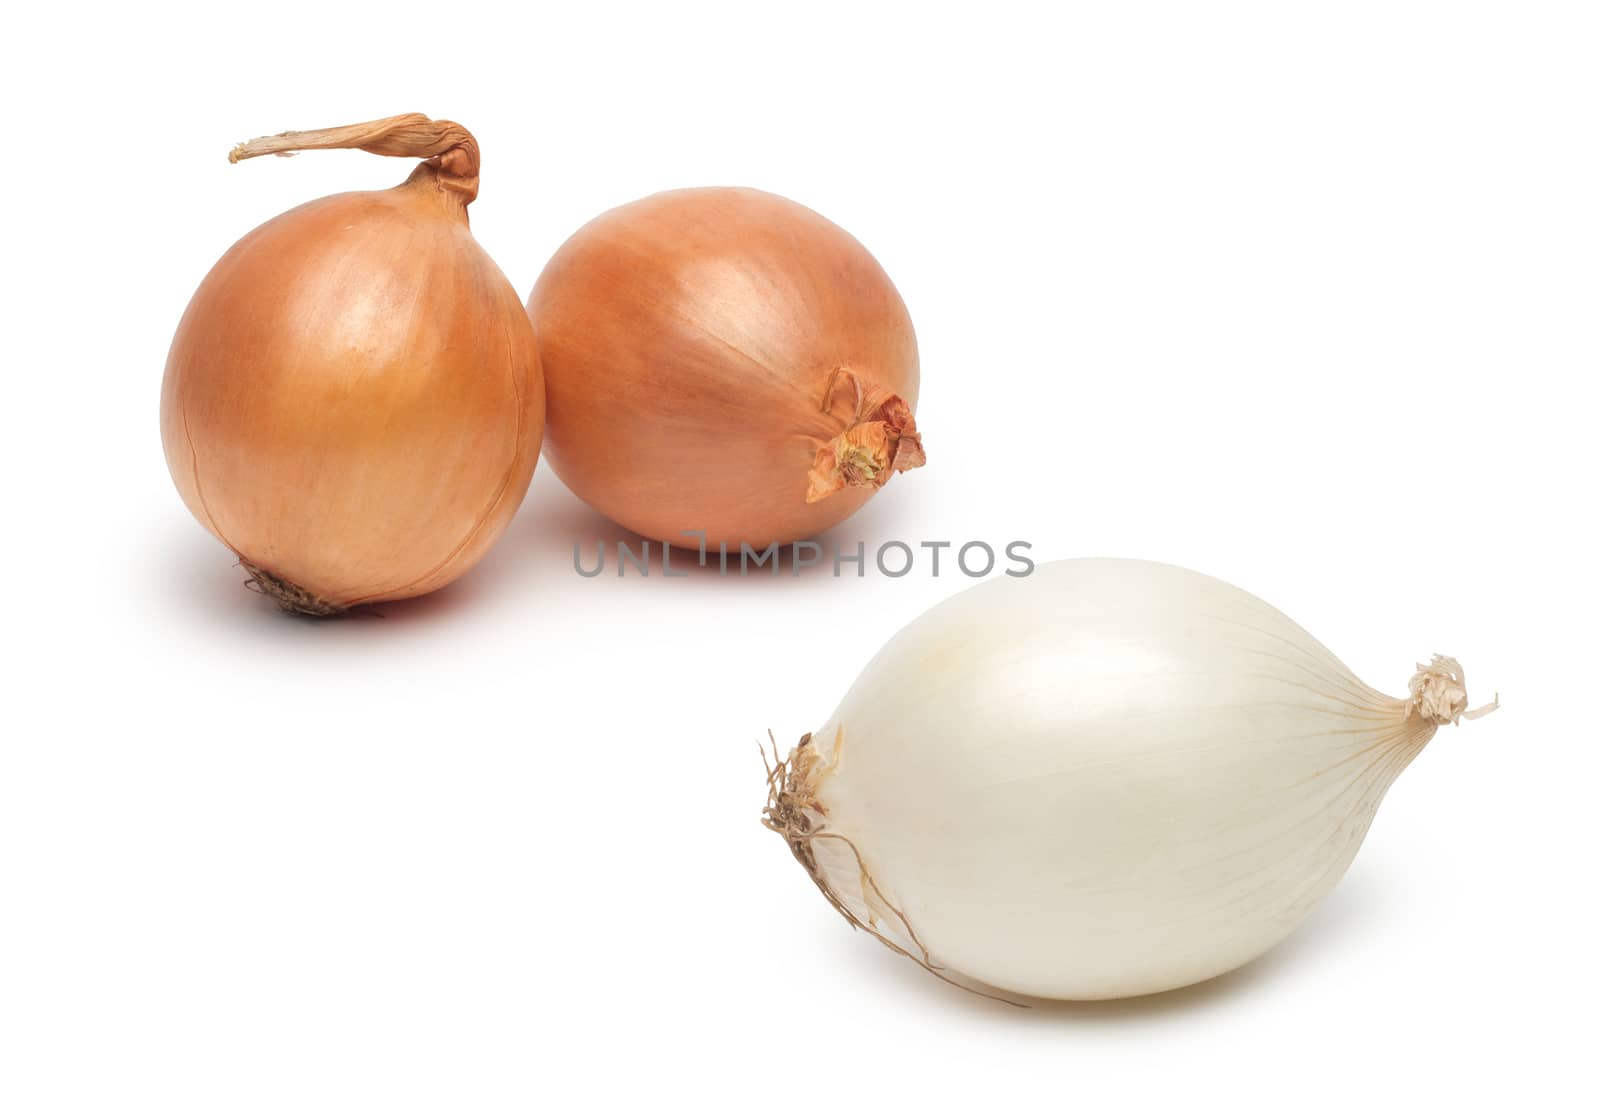 Ripe onions on a white background